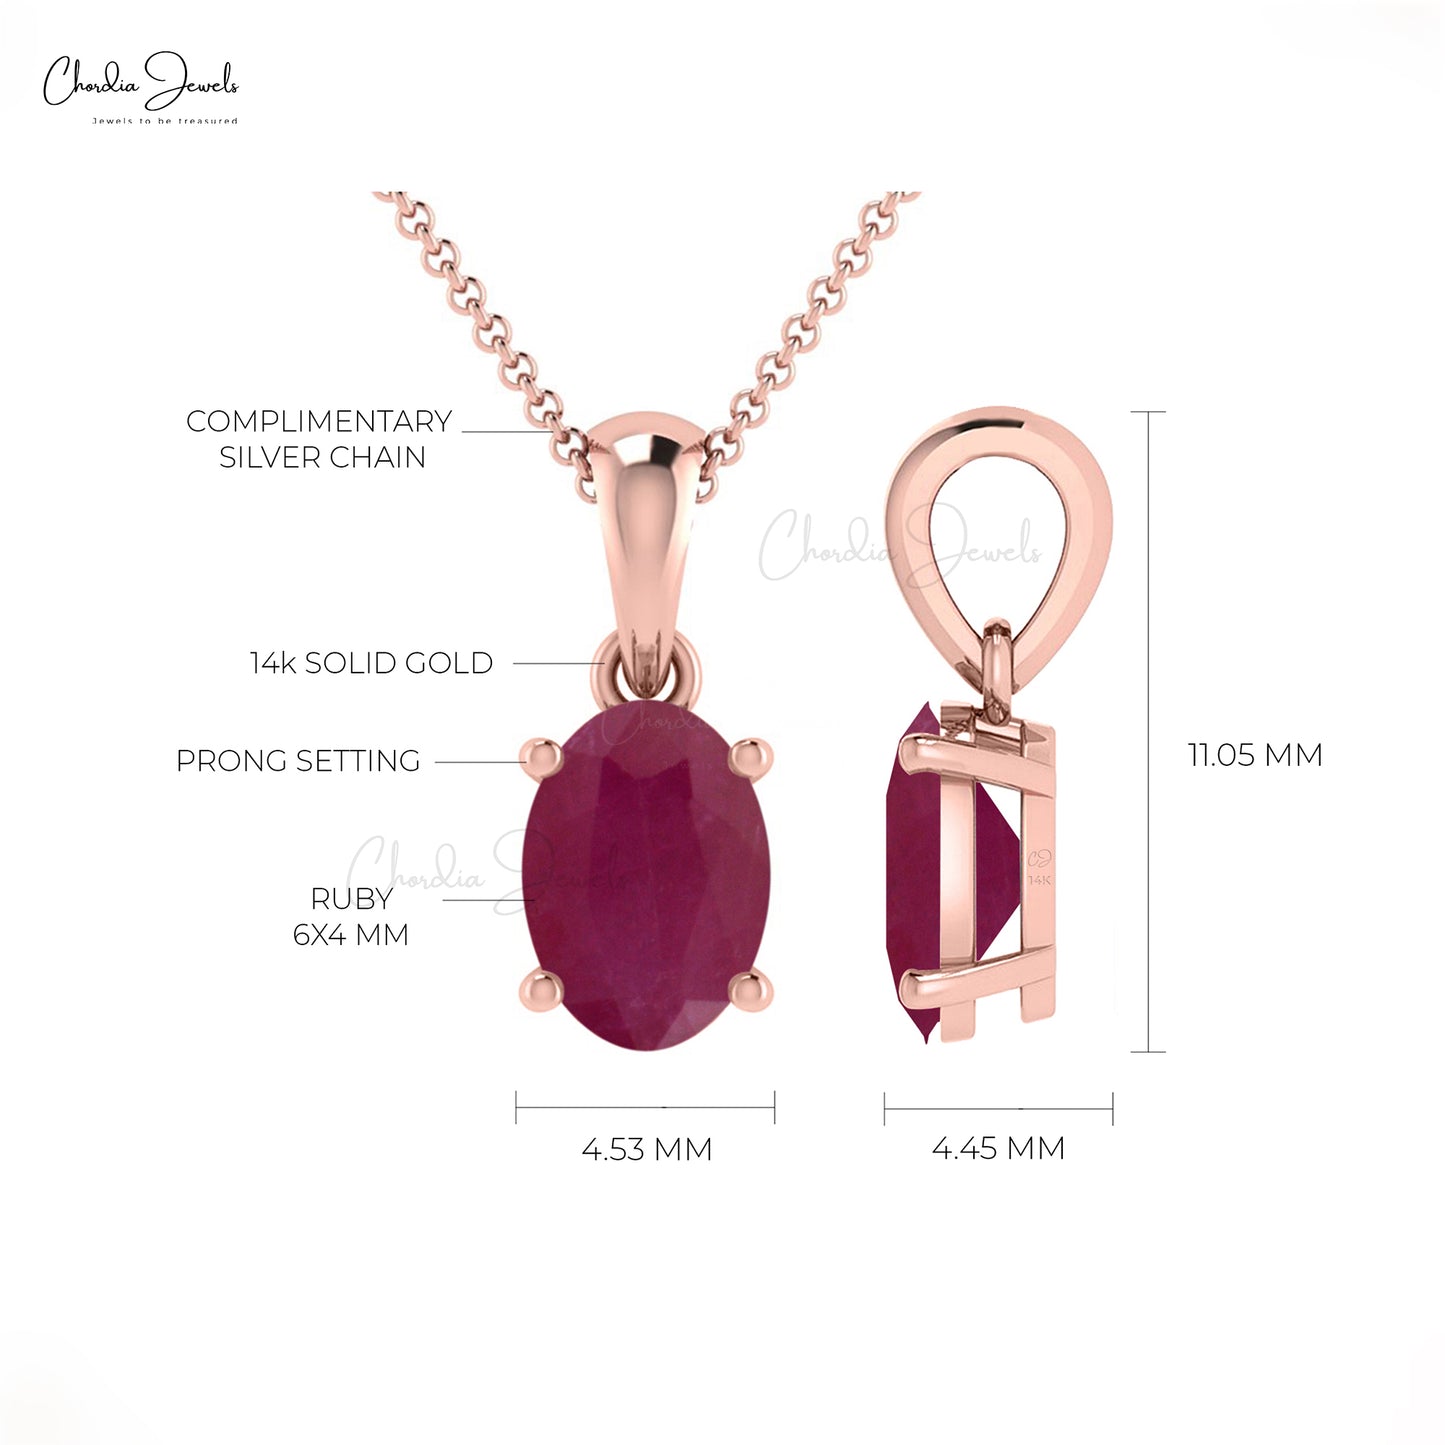 Load image into Gallery viewer, Natural Ruby Gemstone Pendant 0.41Ct Oval Cut Solitaire Pendant In 14k Solid Gold Jewelry
